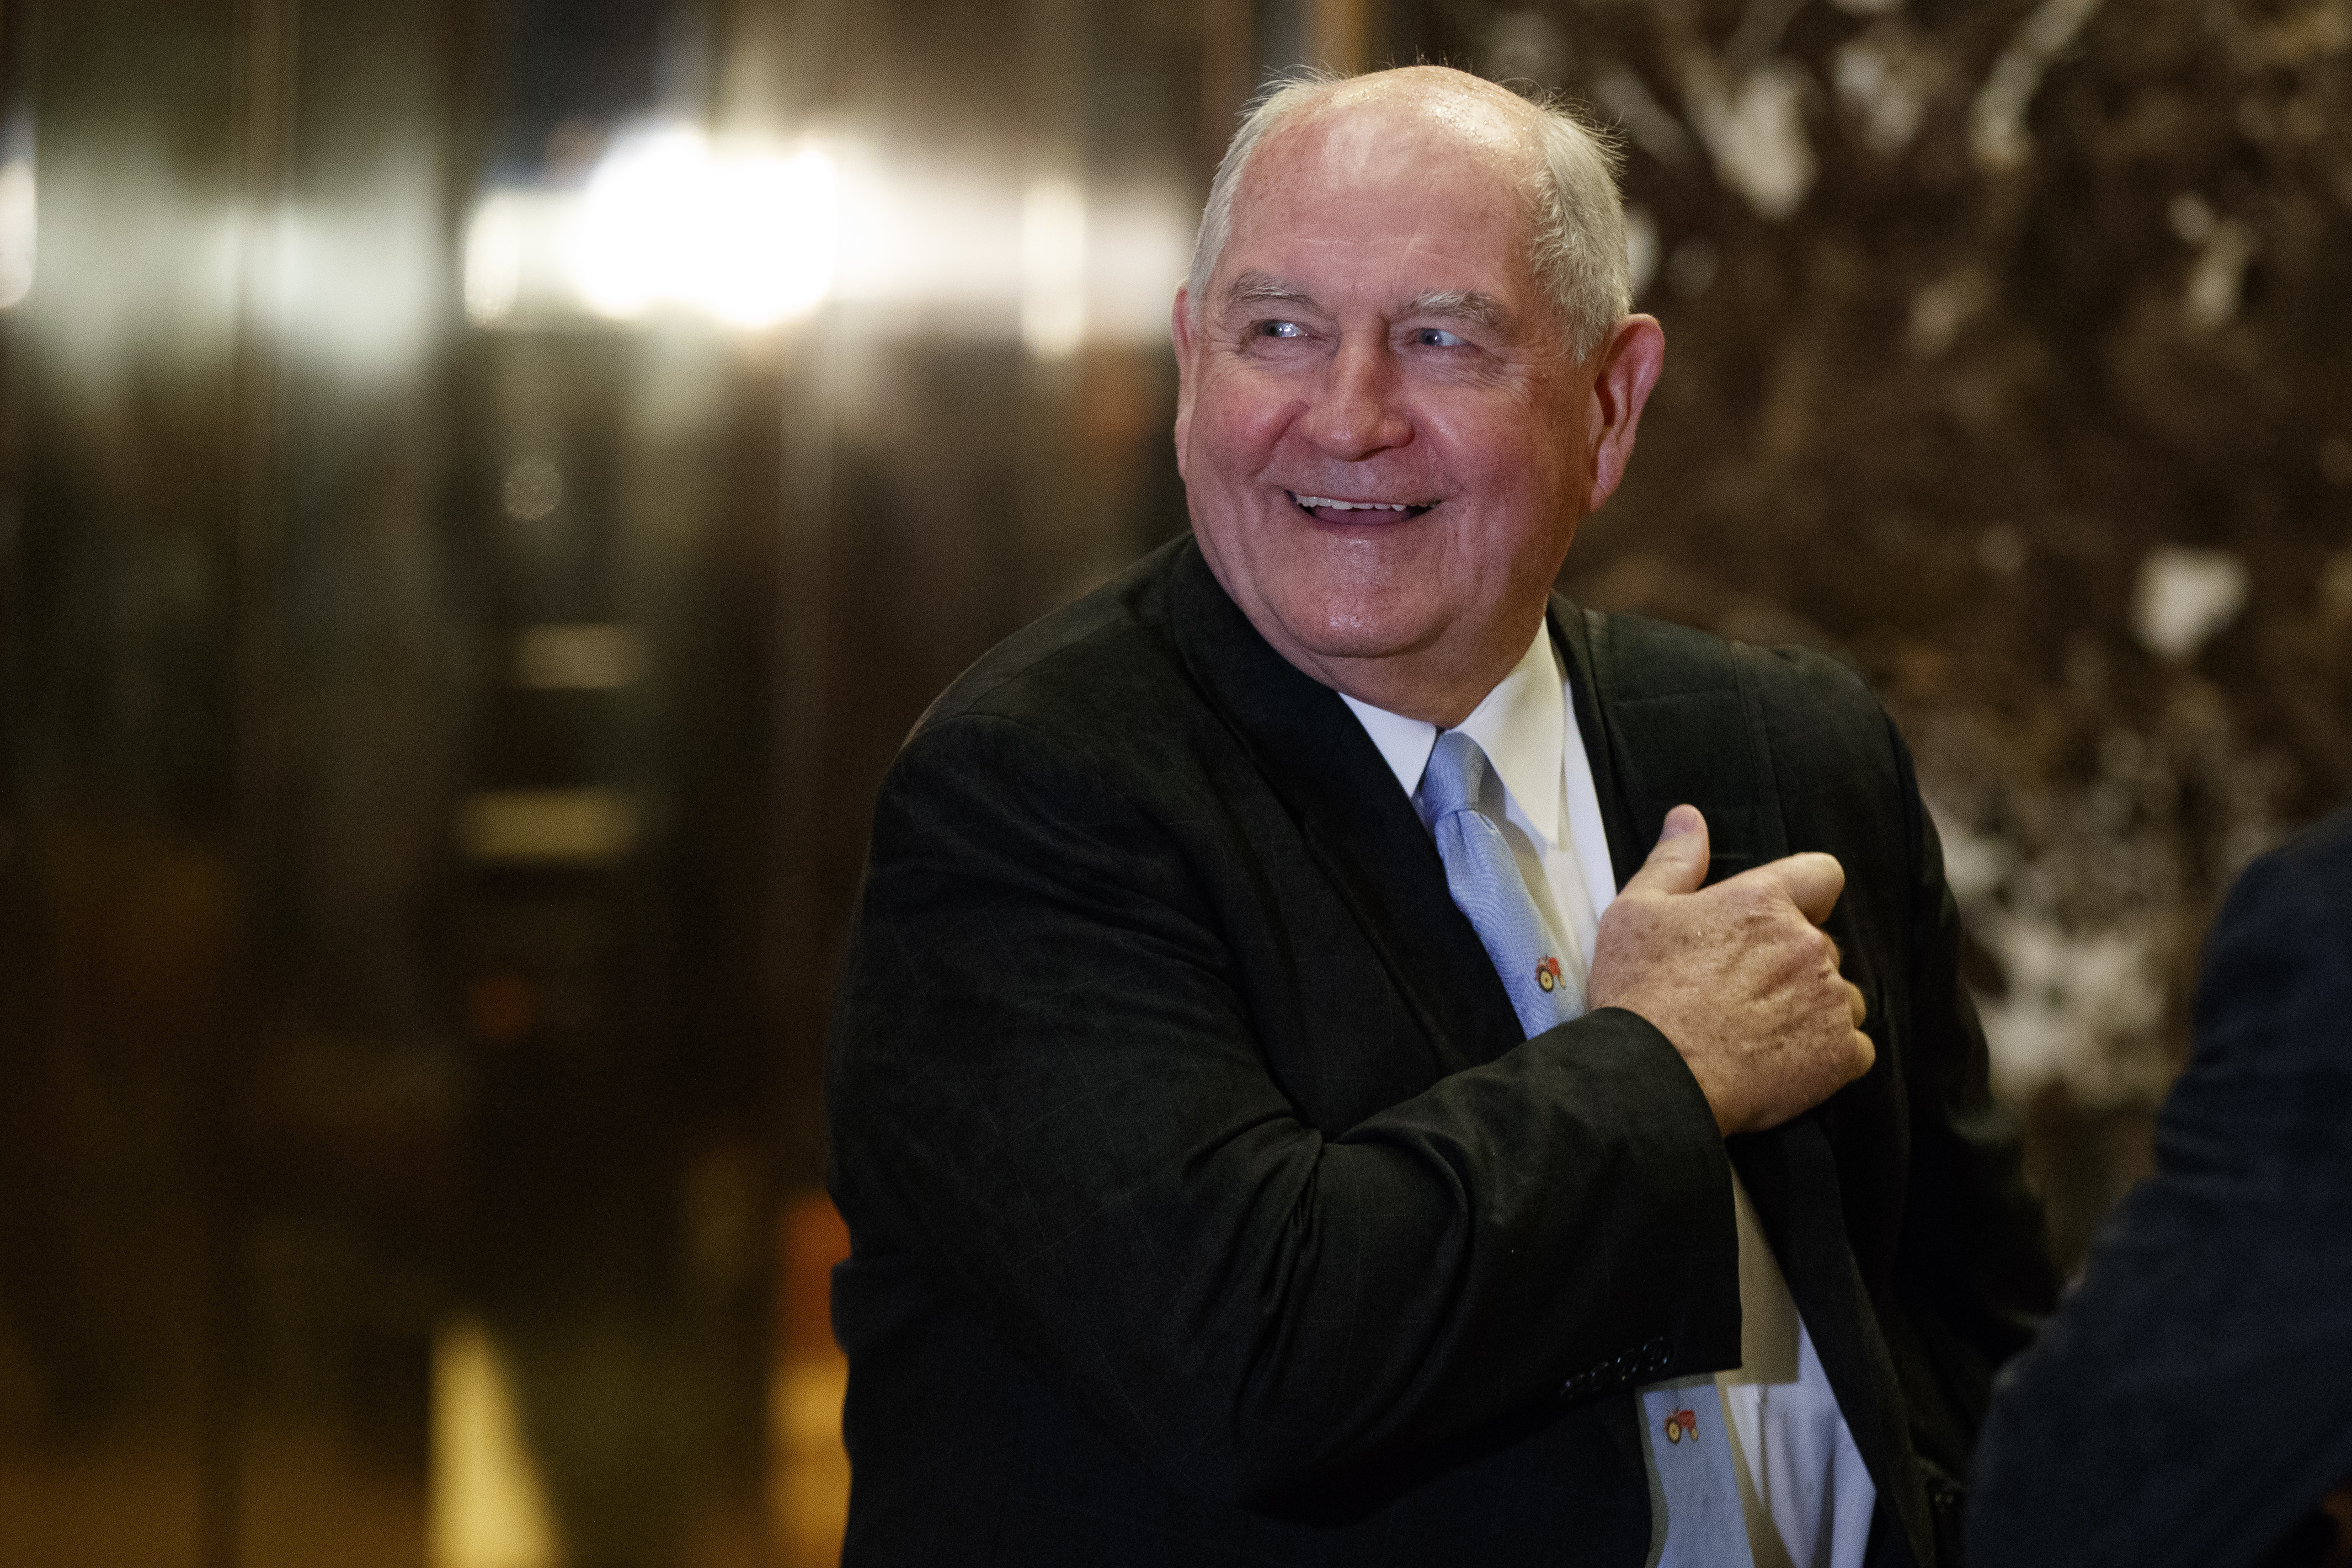 SonnyWatch: Perdue plans to divest assets after confirmation